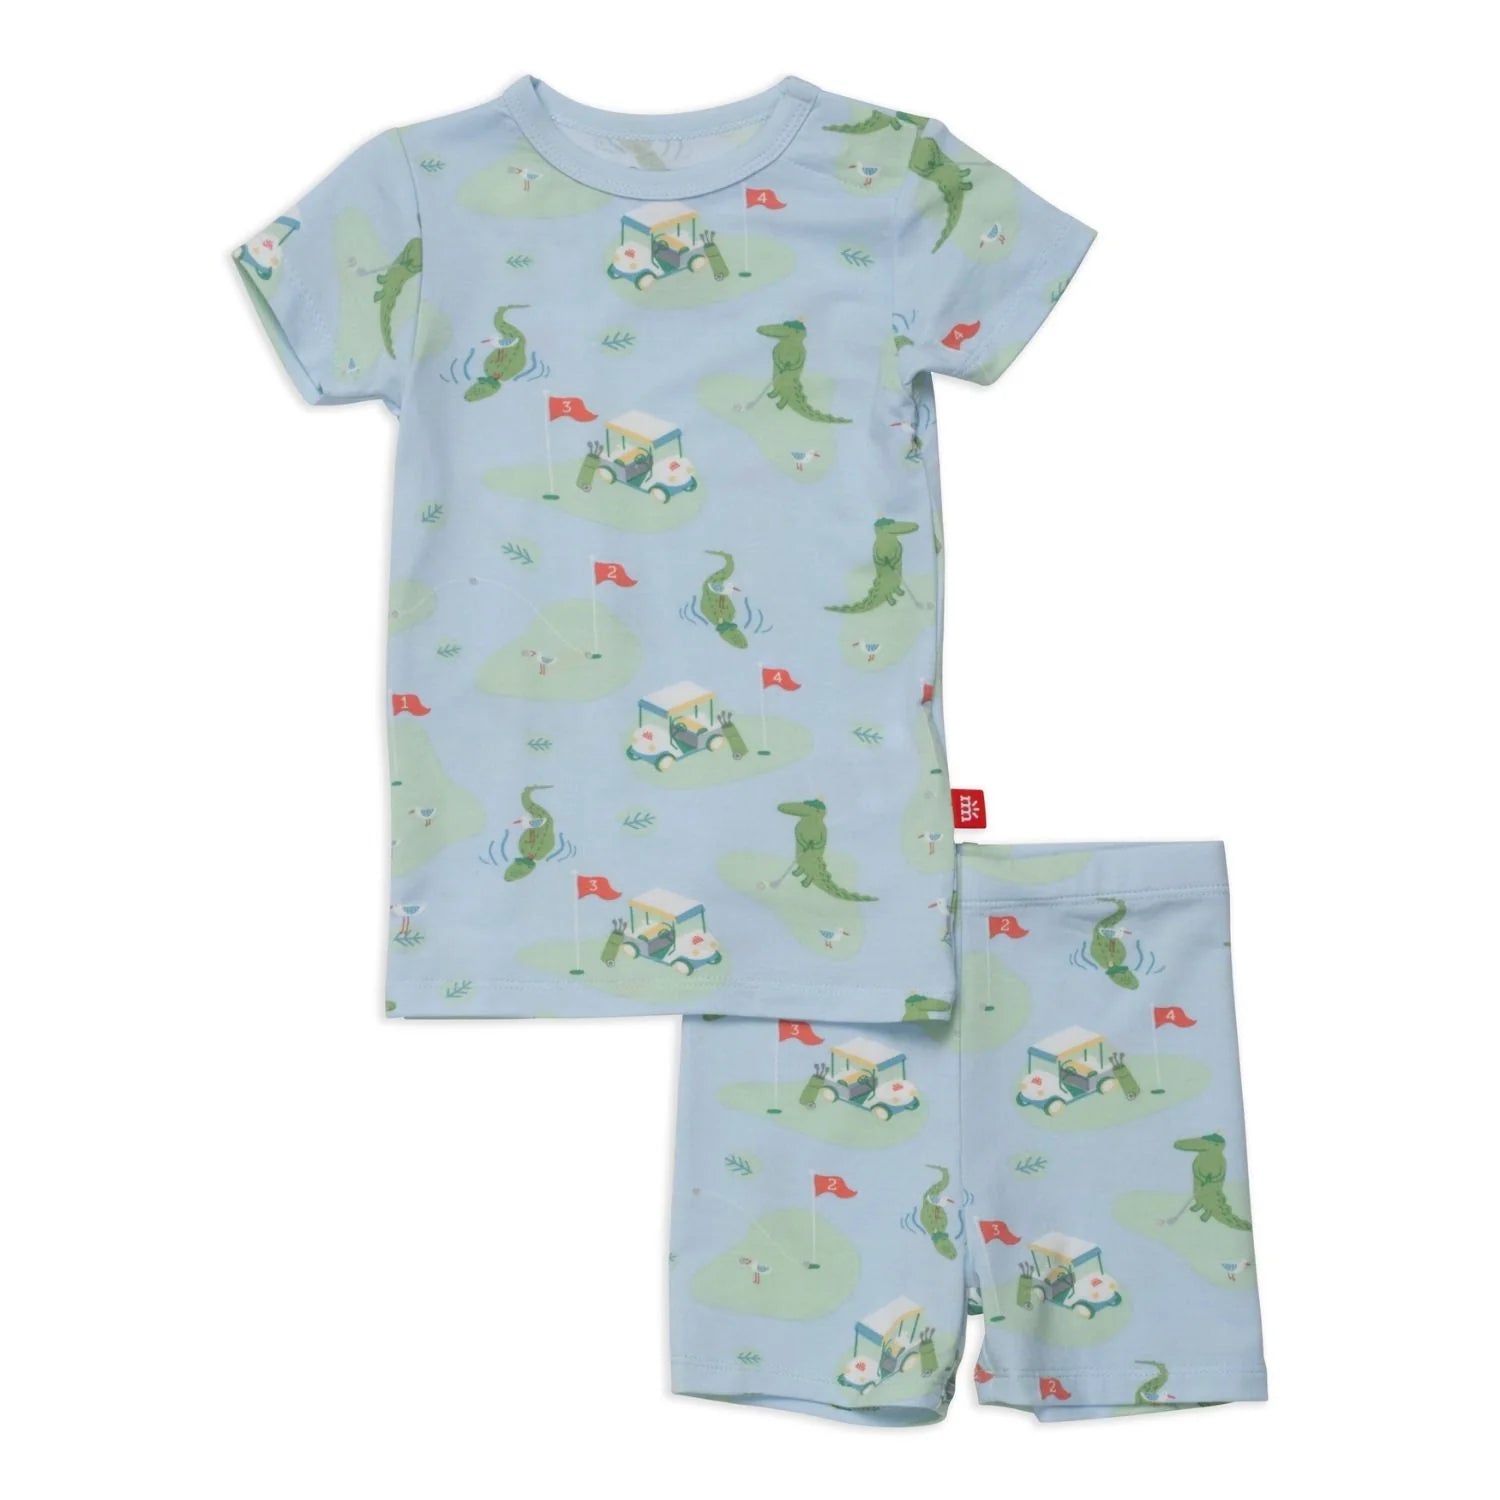 Magnetic Me Modal No Drama Magnetic Me Pajama Shortie Set / A Putt Above